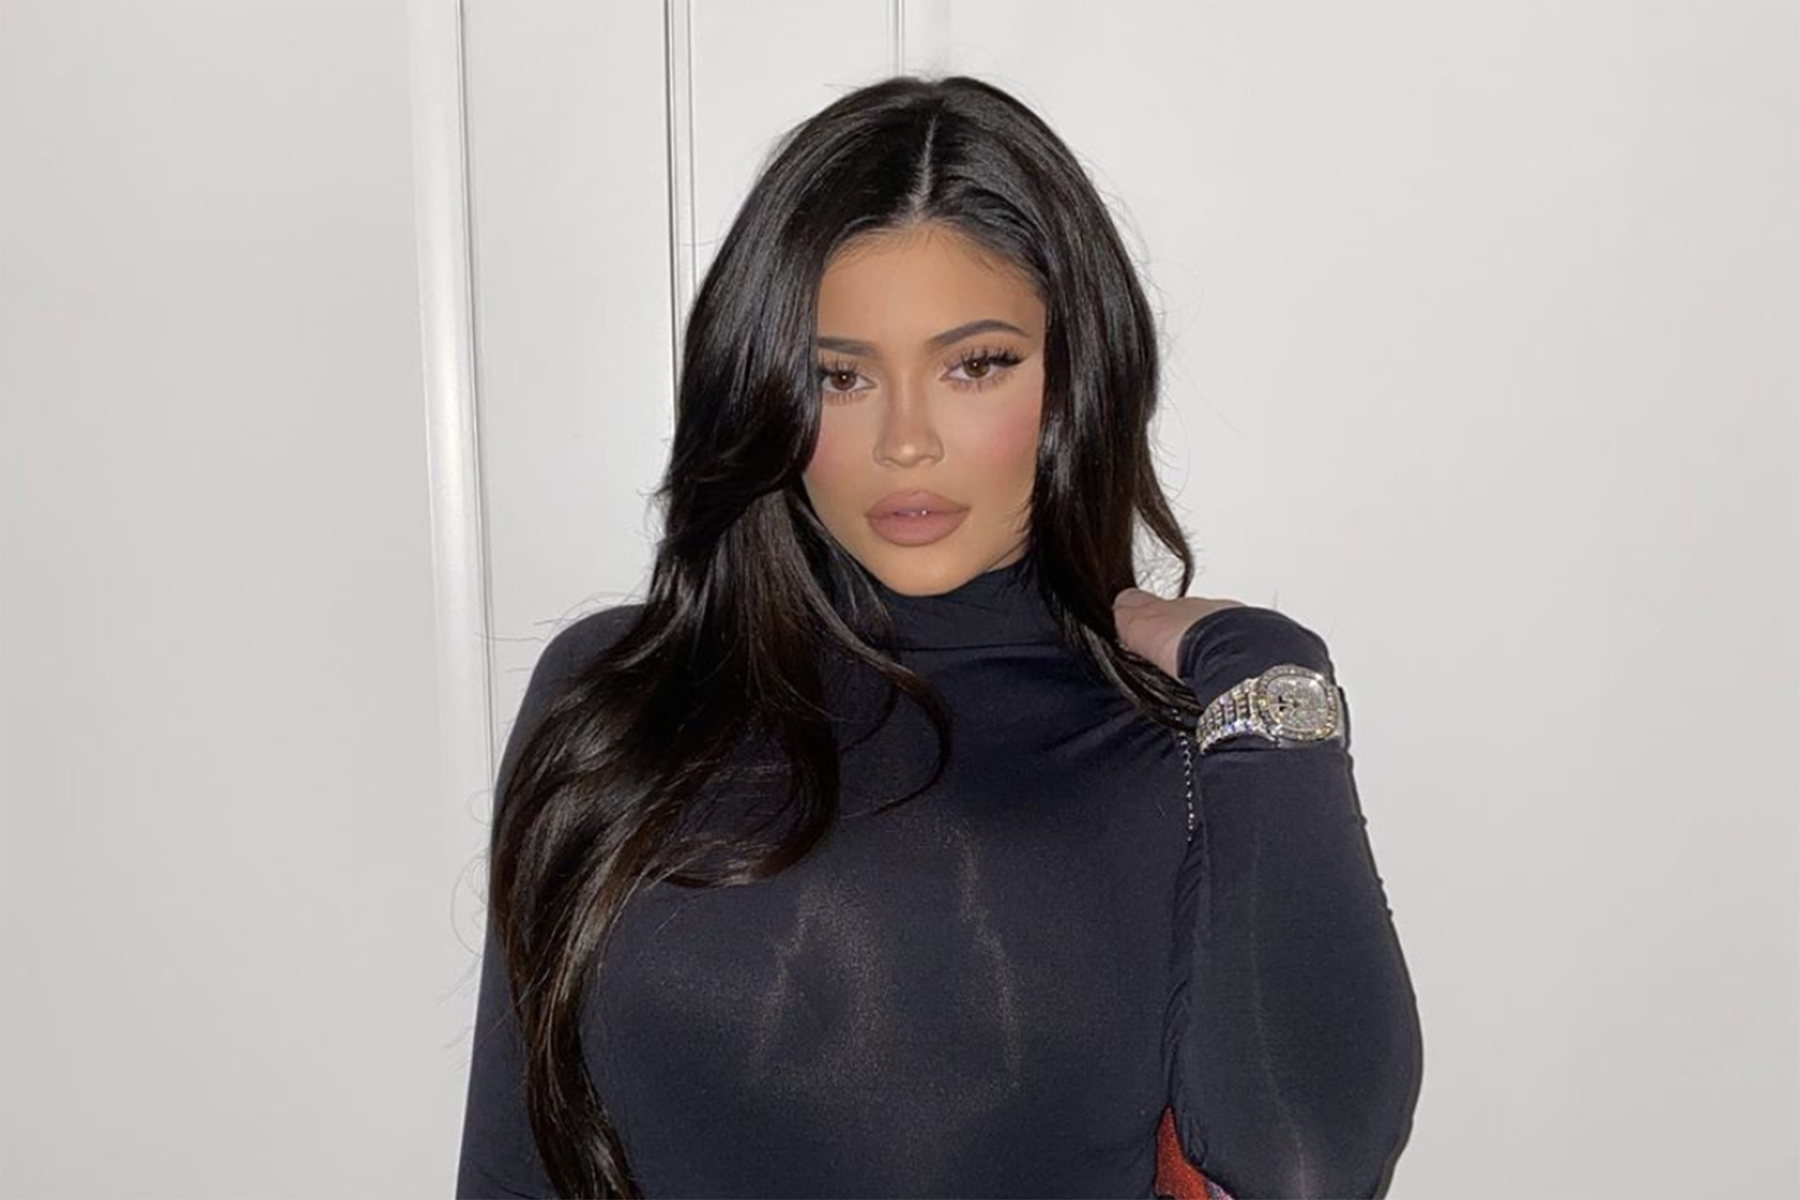 Kylie Jenner Slams Forbes For Stripping Billionaire Status And Accusing Her Of Lying